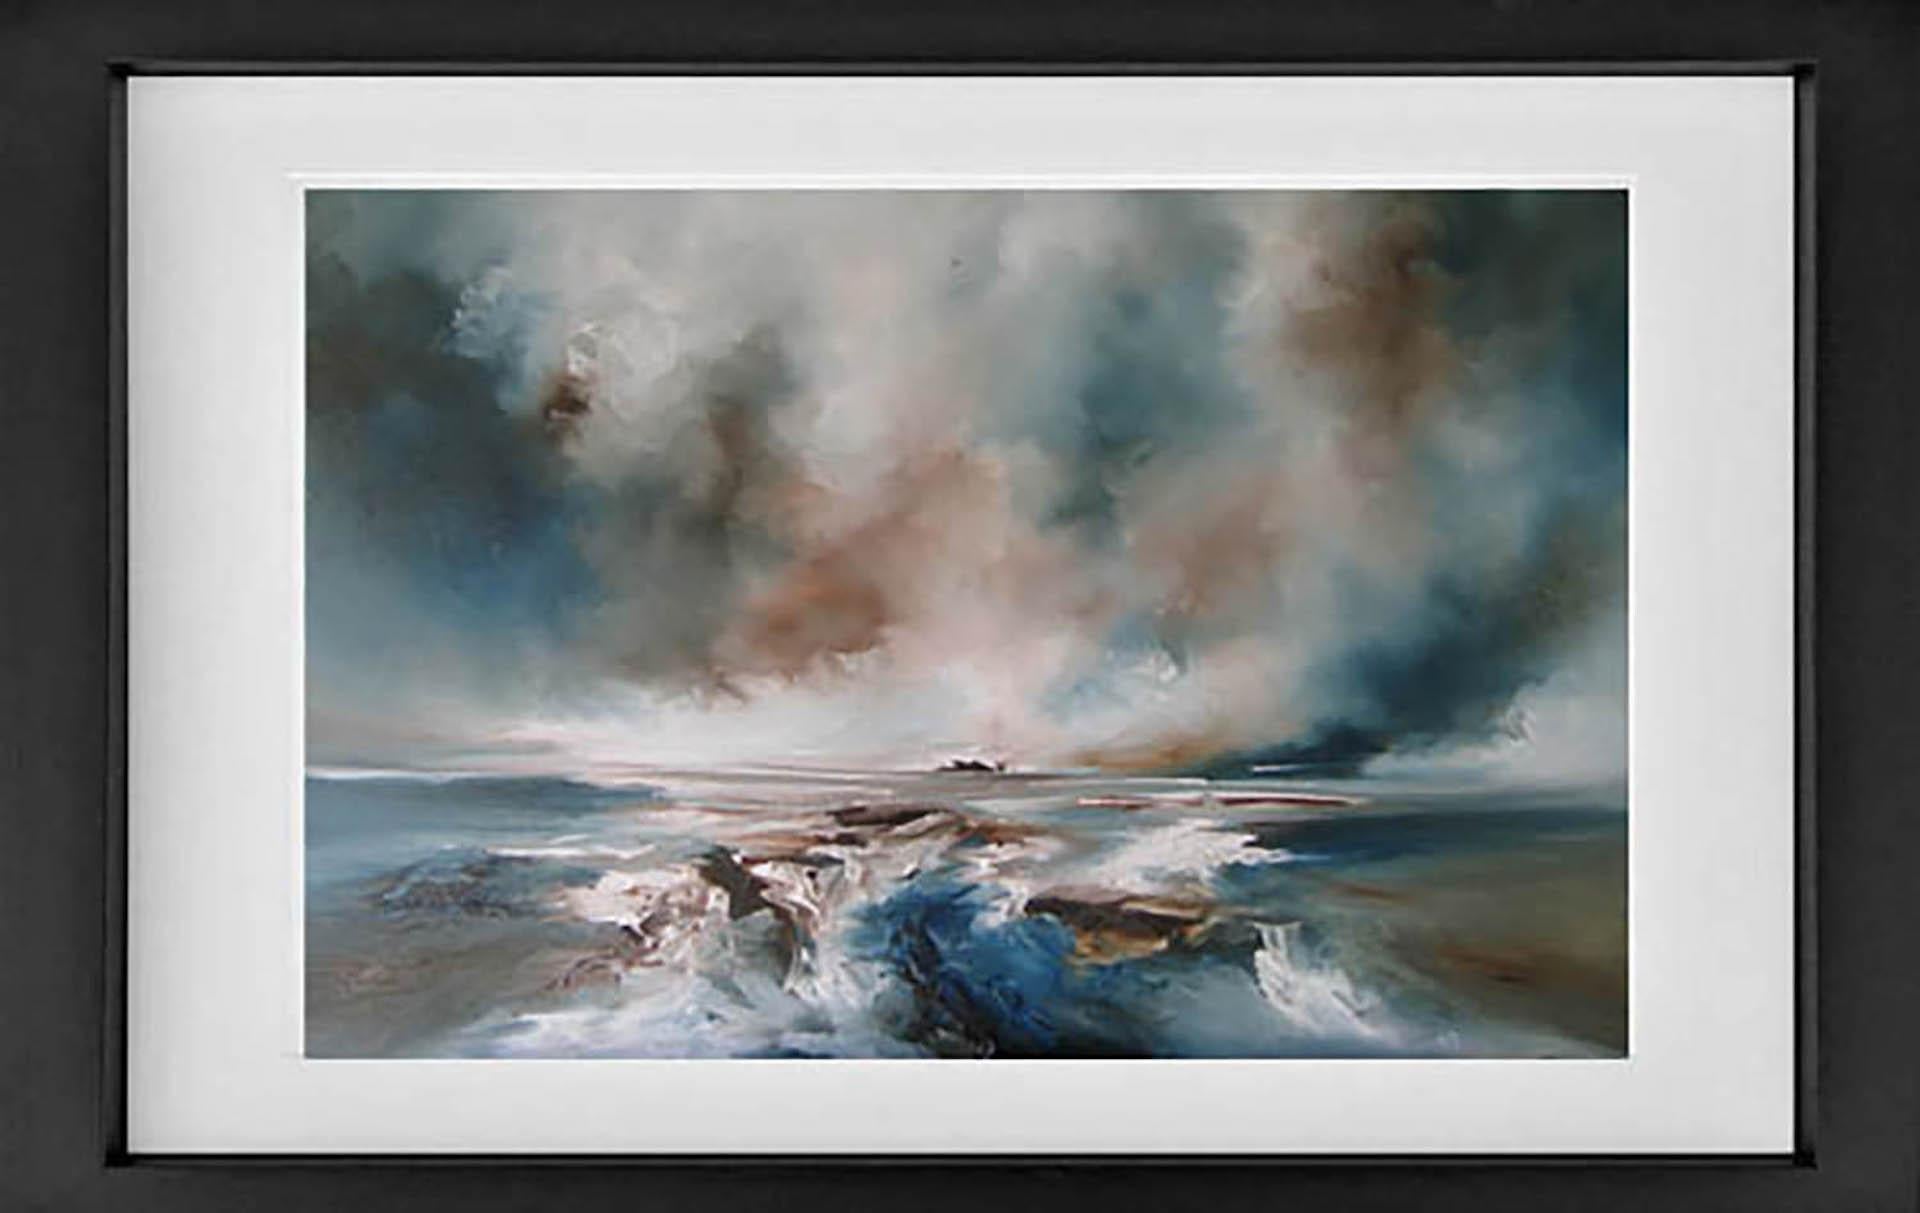 Alison Johnson
Distance
Original Seascape Painting
Oil Paint on Canvas
Canvas Size: H 60cm x W 80cm
Sold Unframed
Please note that in situ images are purely an indication of how a piece may look.

Distance is an original impressionist seascape